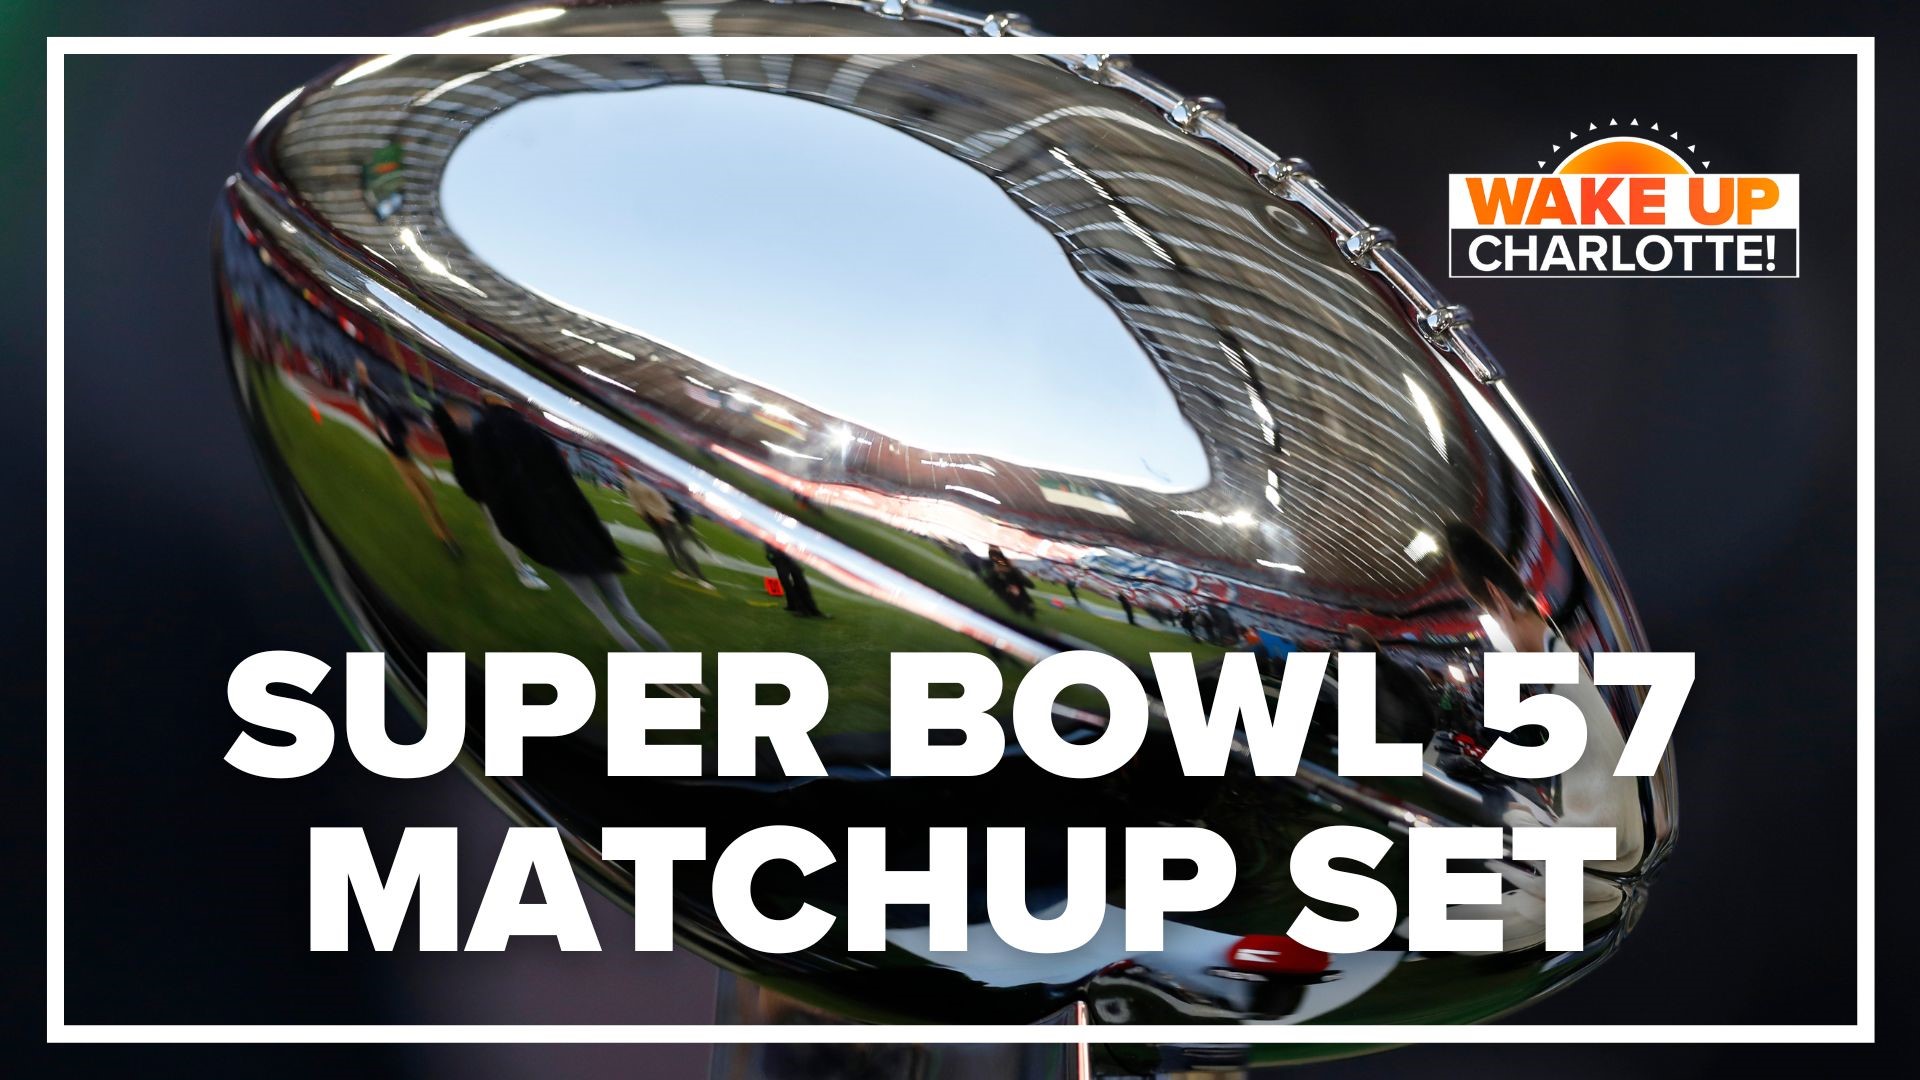 The Philadelphia Eagles and Kansas City Chiefs will do battle in Super Bowl 57 on Feb. 12. Which team are you pulling for in the big game?